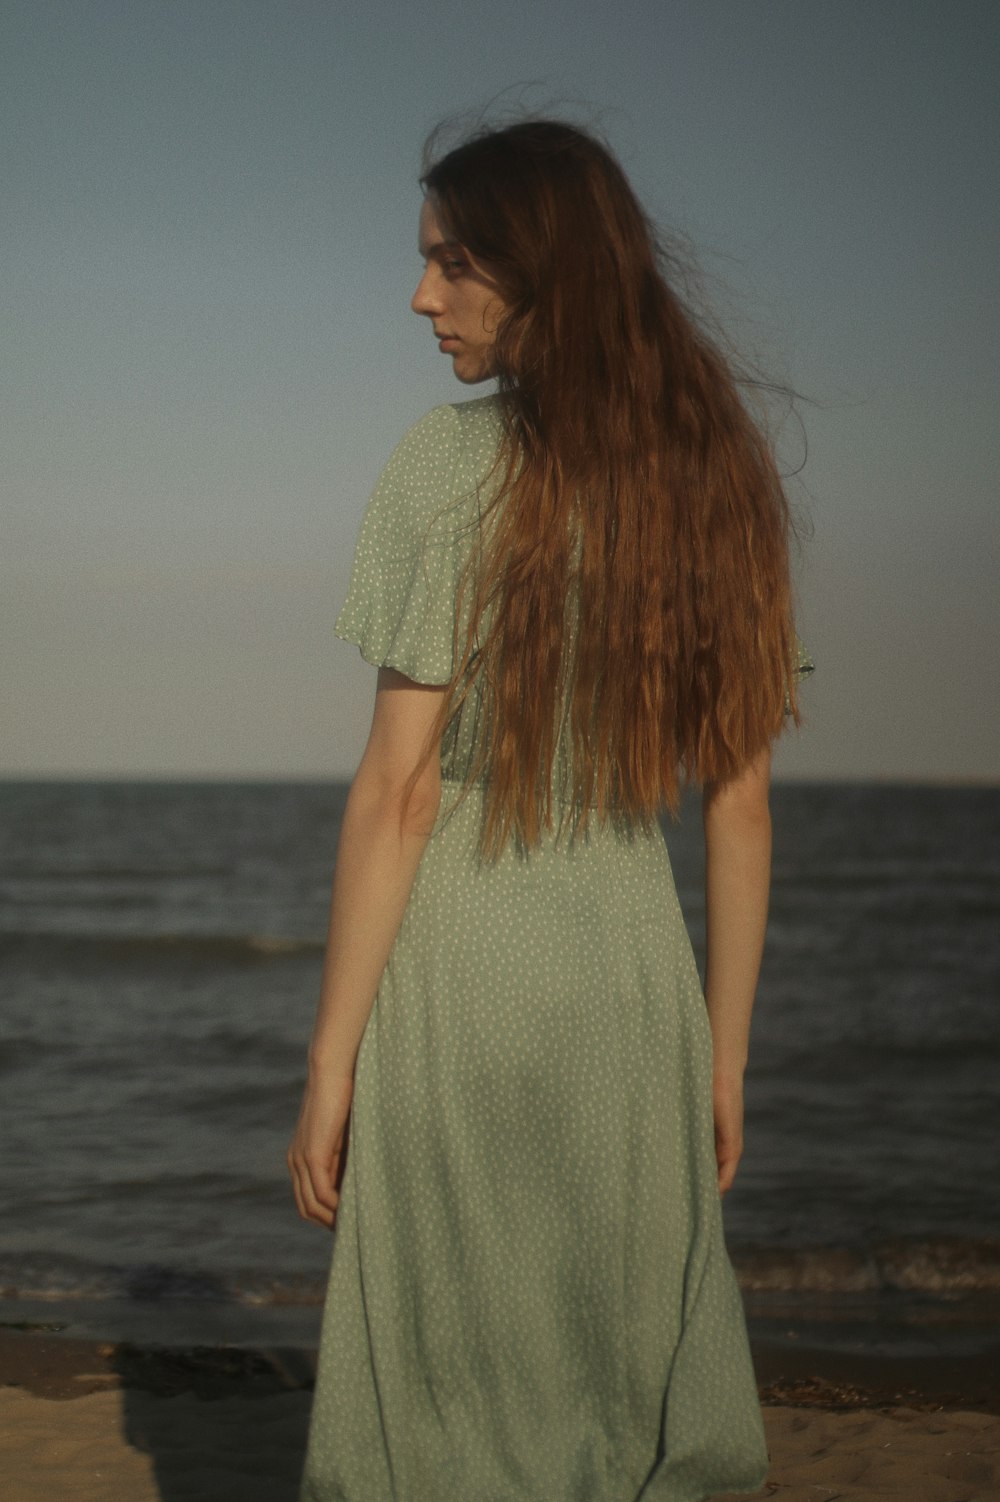 woman in green dress standing on beach during daytime